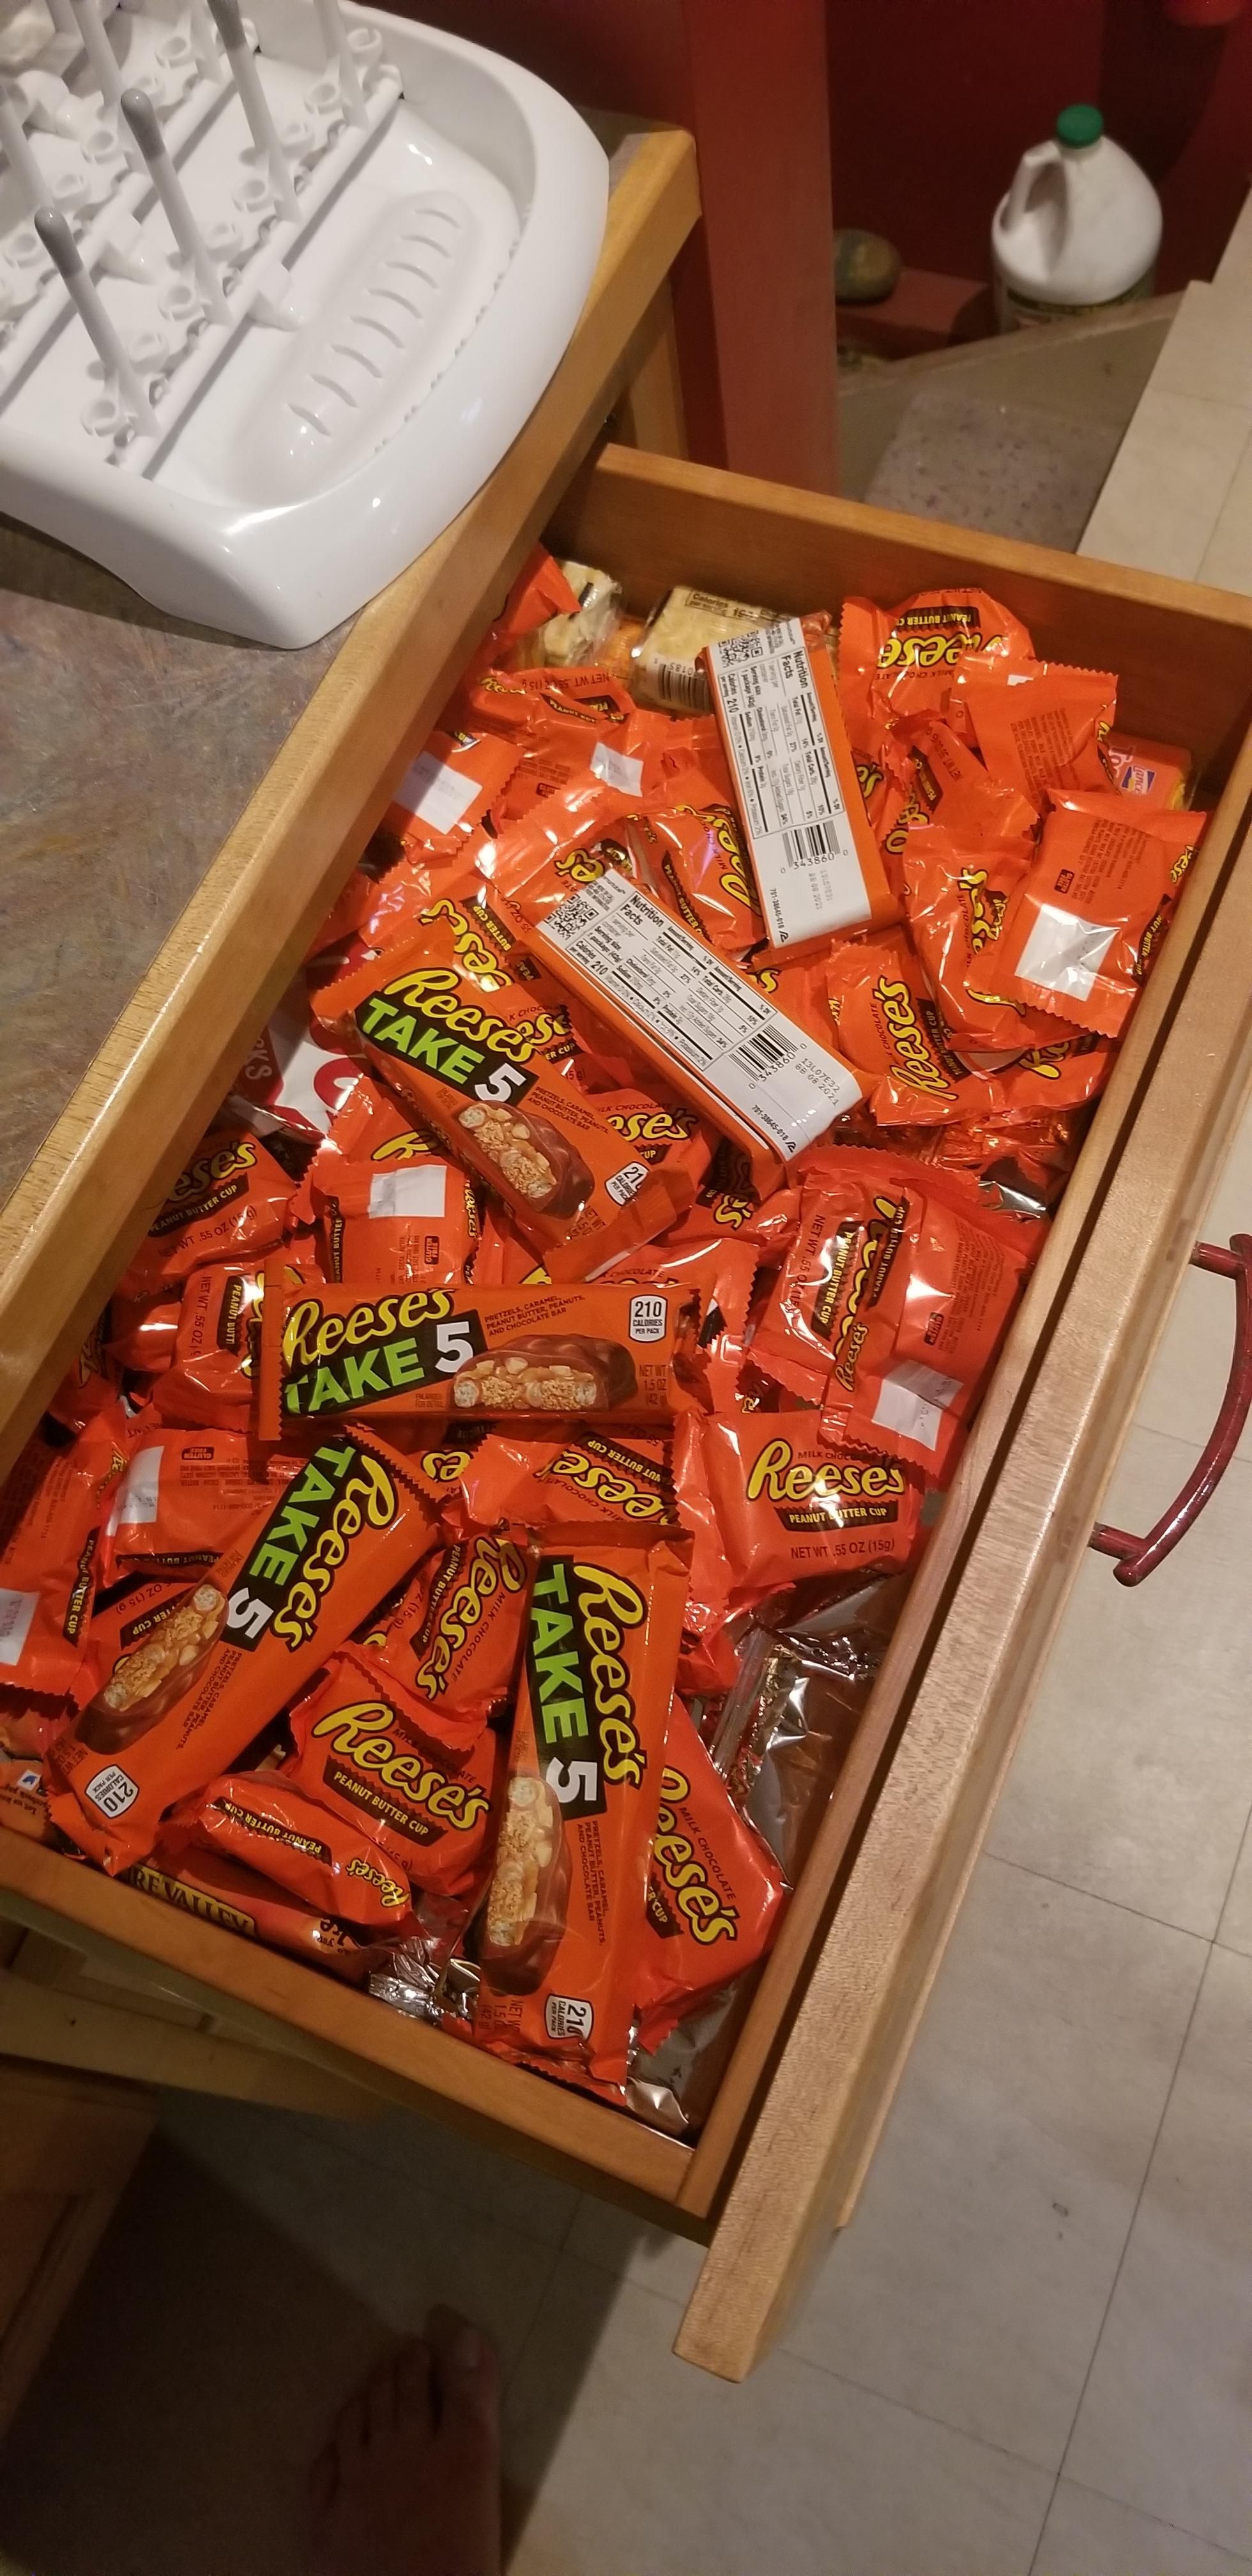 Some people have a snack drawer. I have a Reese's drawer.